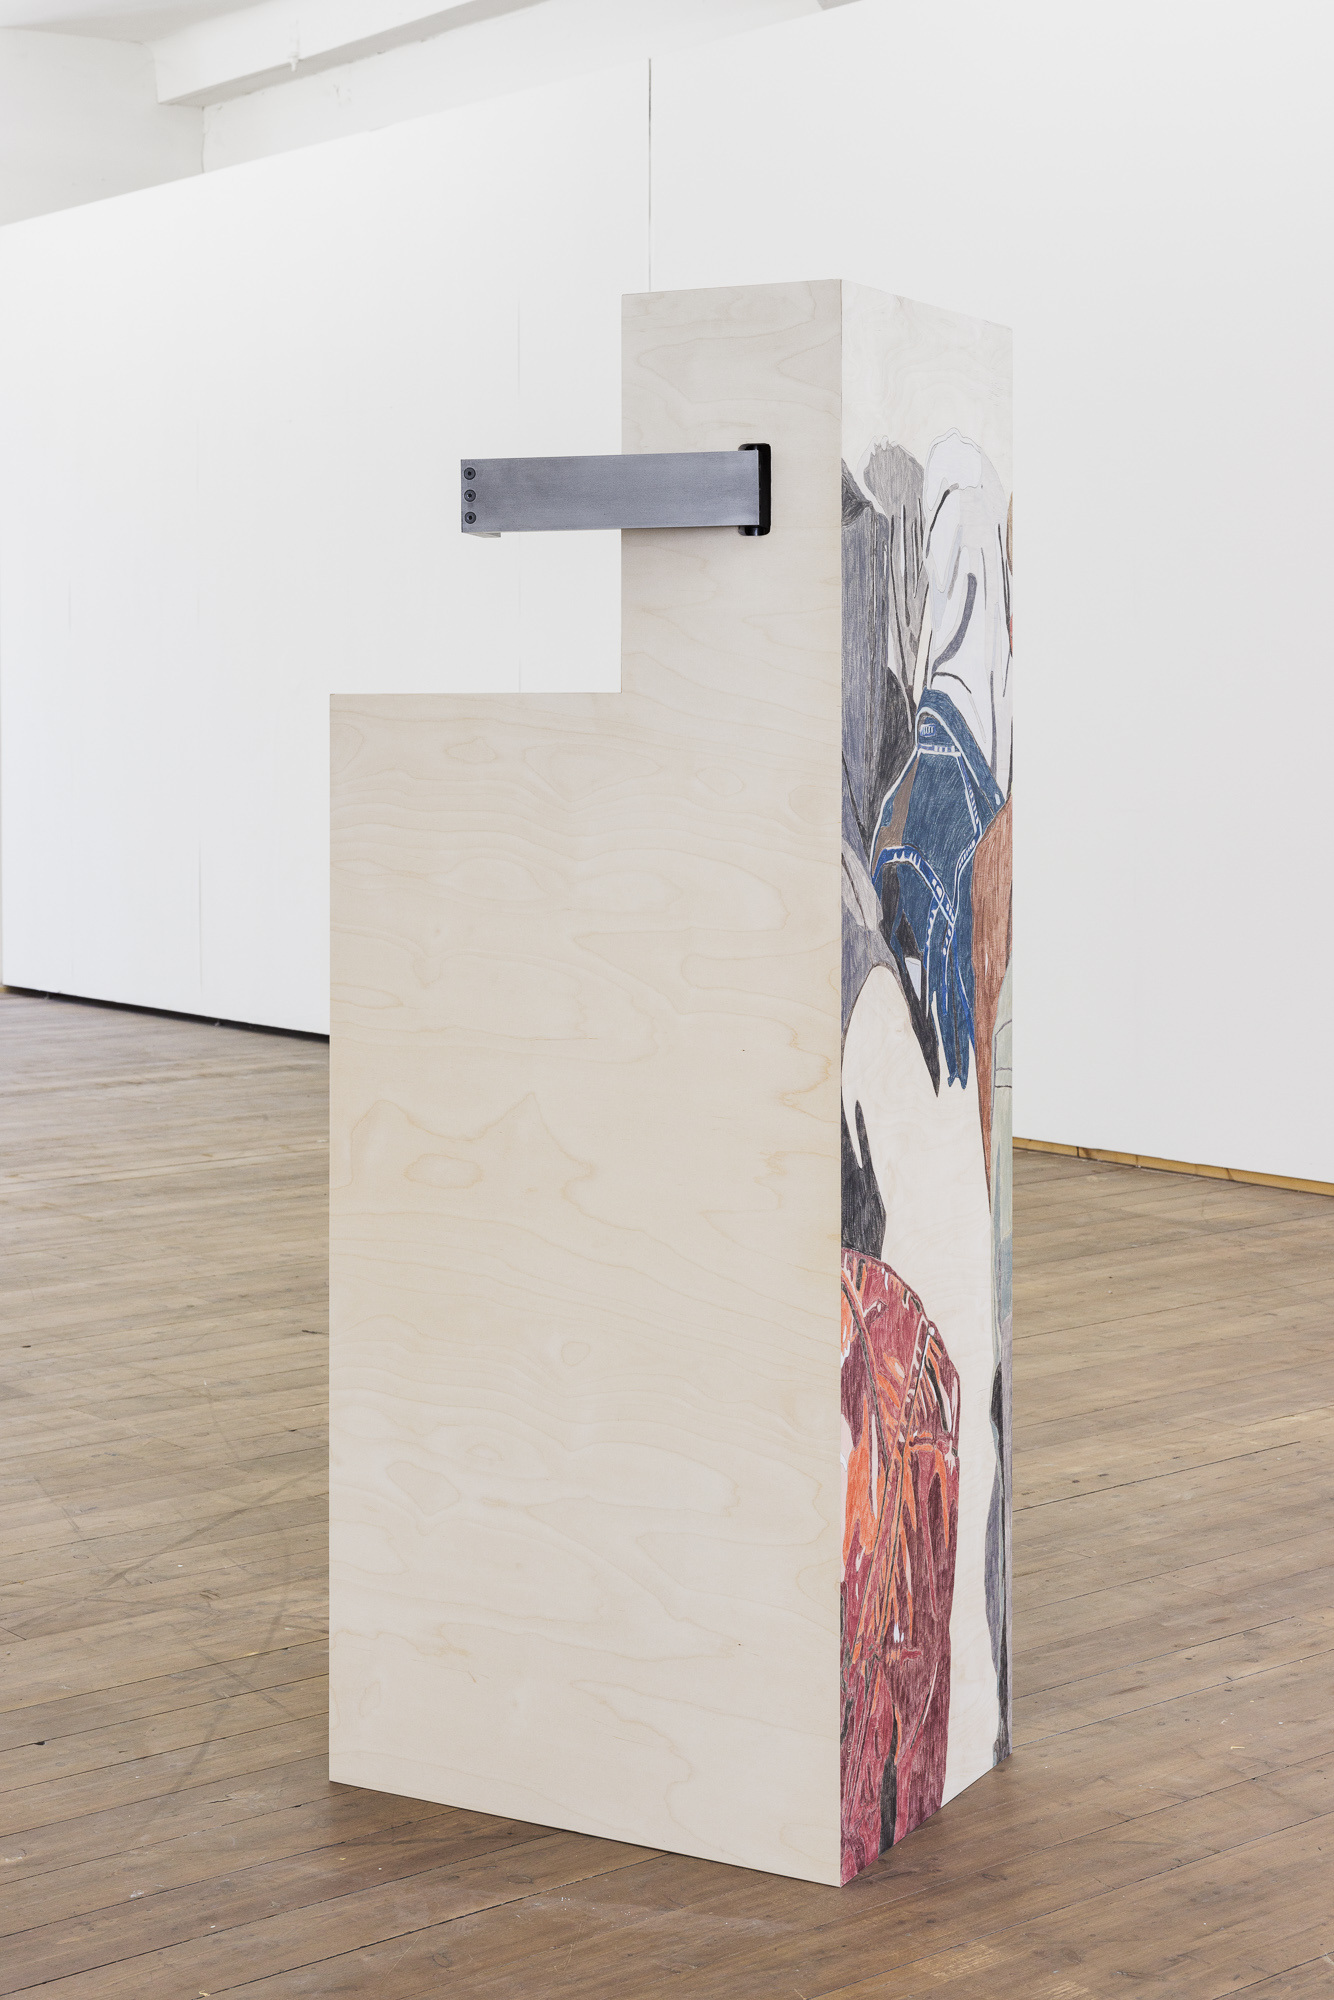 Bartholomaeus WÃ¤chter  Anytime, Anywhere, Instantly (Two Chairs), 2022 Steel, Birch Plywood, Color pencil and pencil on wood, 170 x 66 x 48 cm